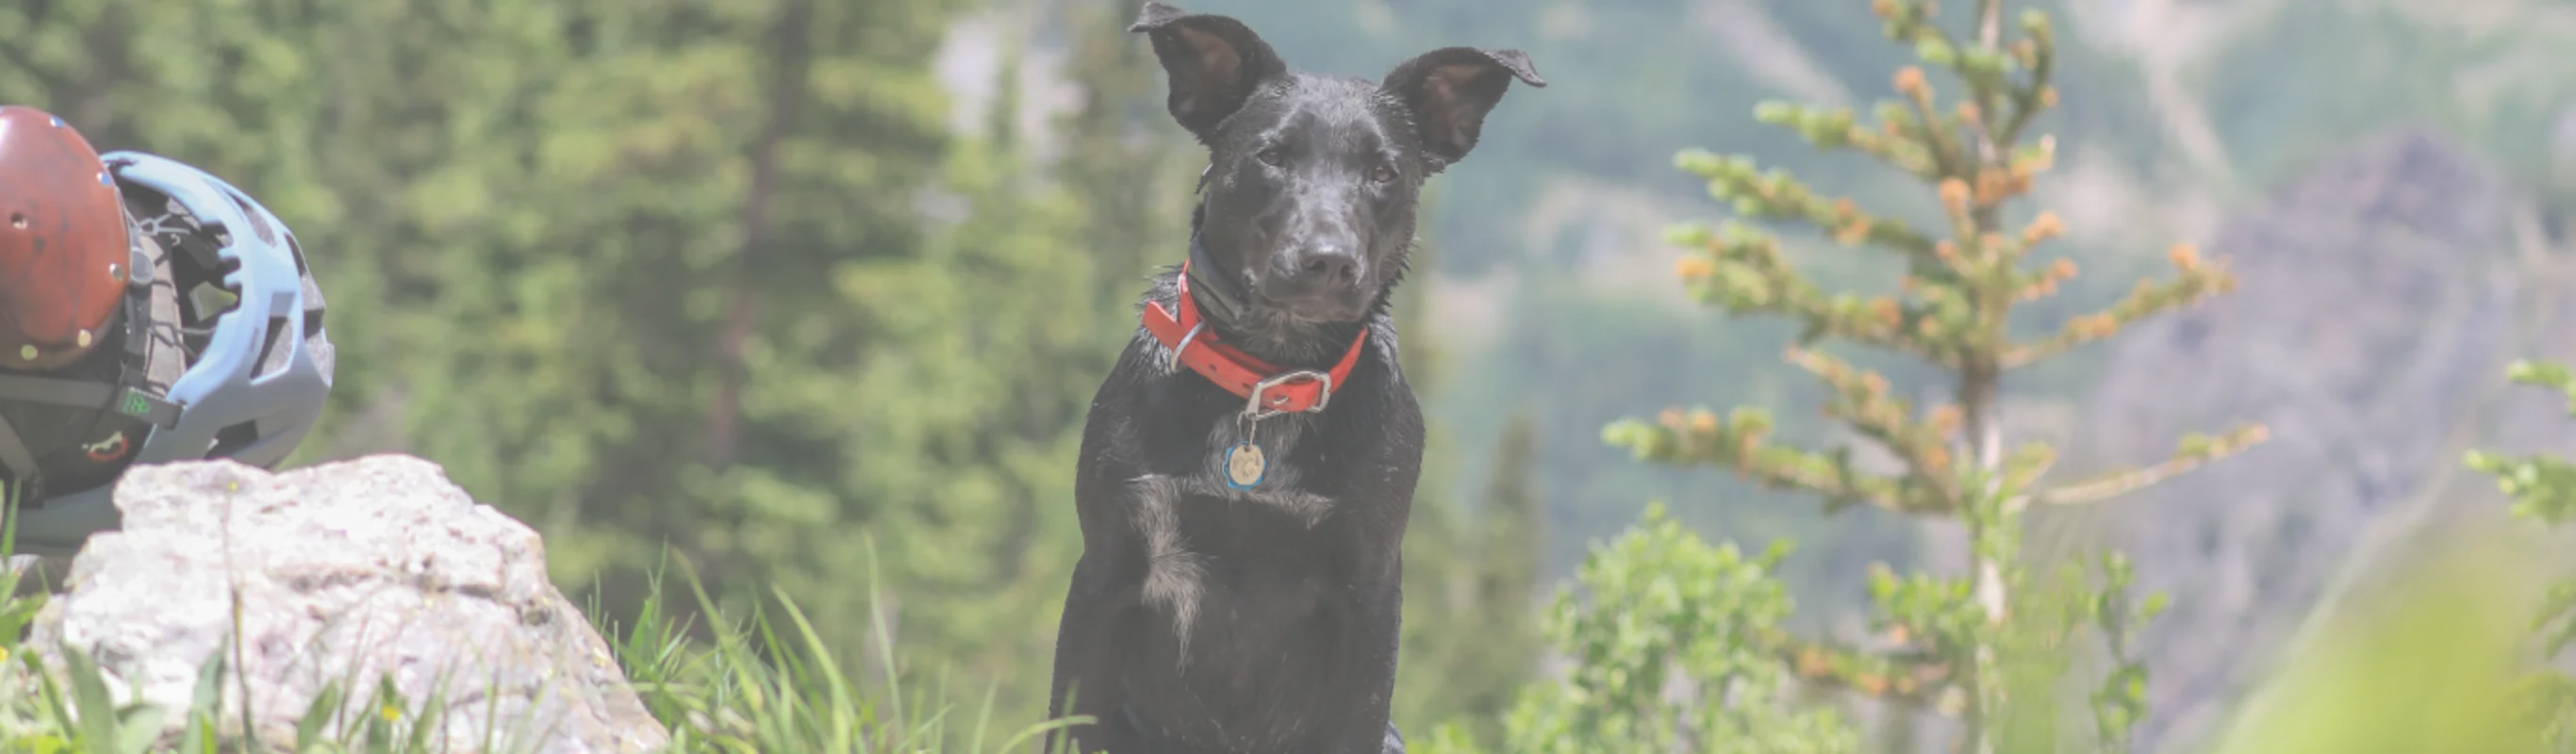 black dog with red collar in the mountains